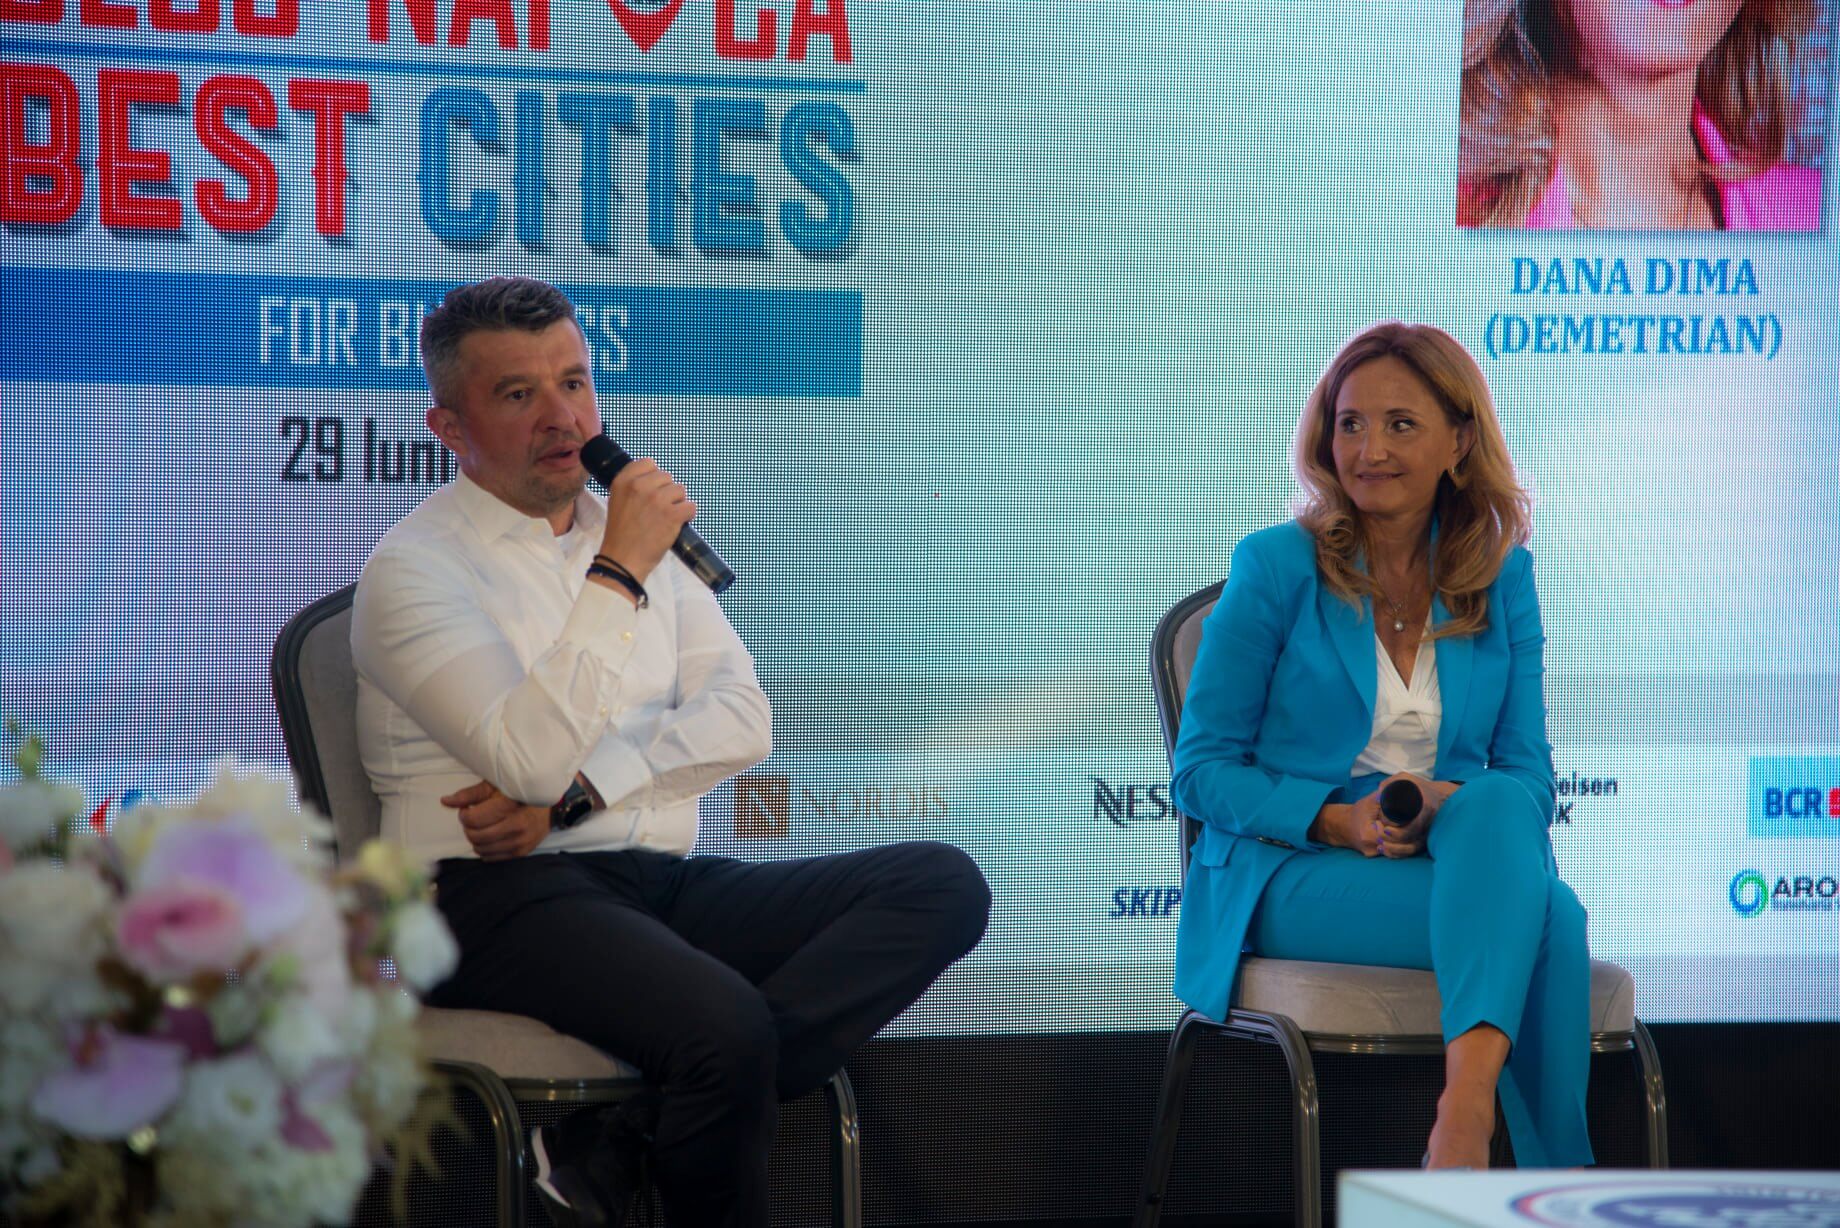 Calin Vaduva and Dana Dima (Demetrian) at Forbes Best Cities for Business